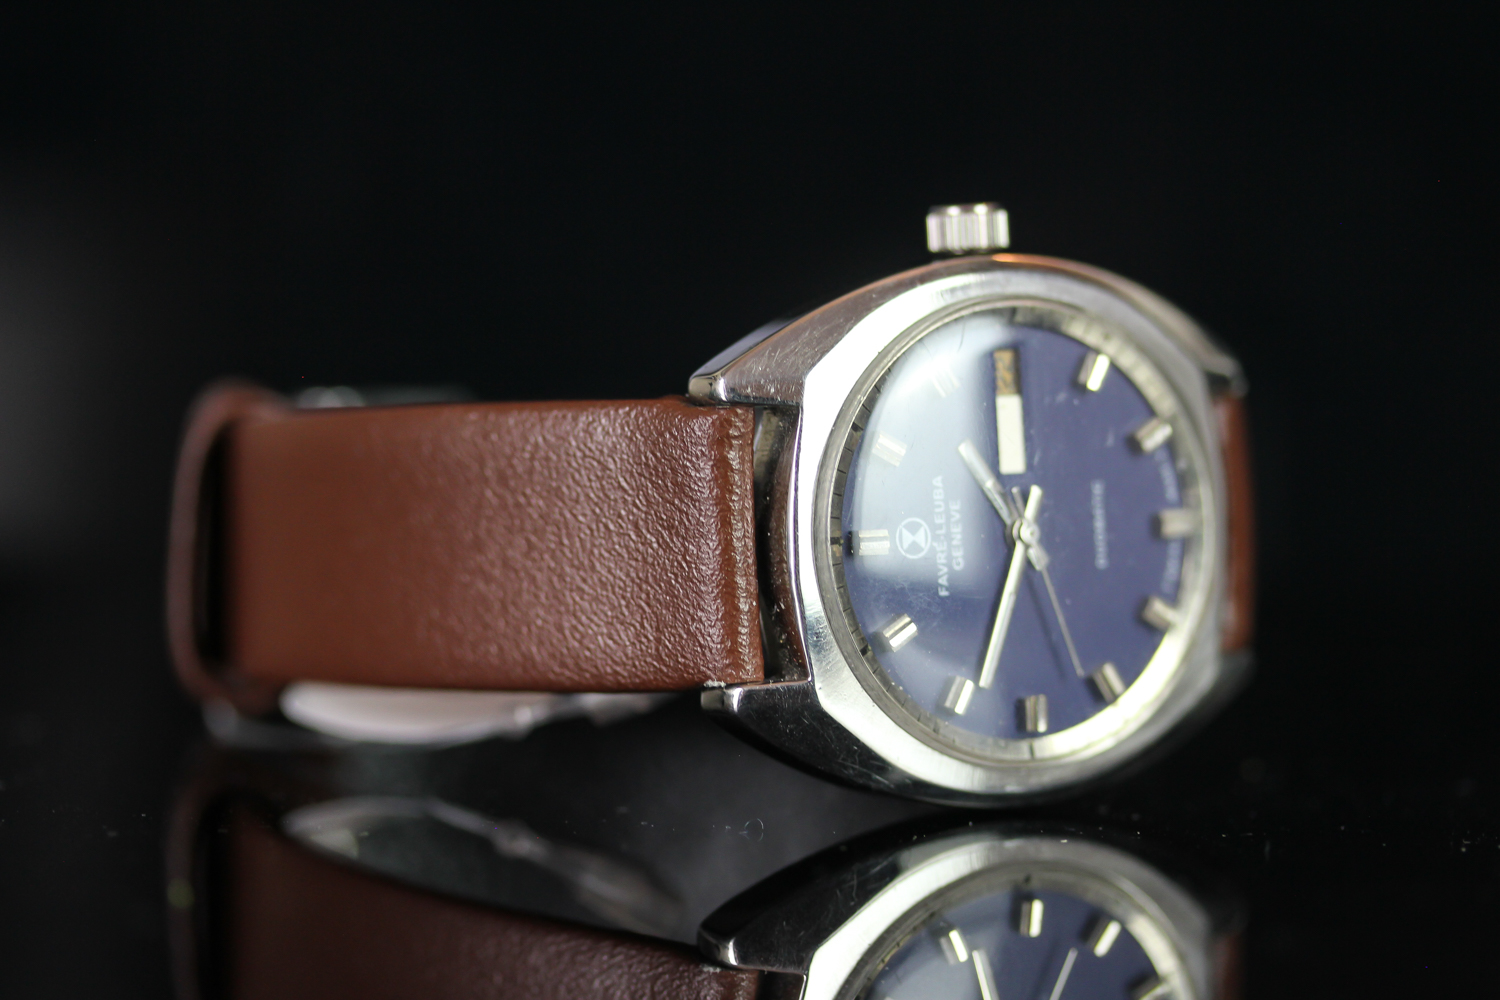 GENTLEMENS FAVRE LEUBA DUOMATIC WRISTWATCH, circular blue dial with hour markers, date at 3 0'clock, - Image 2 of 3